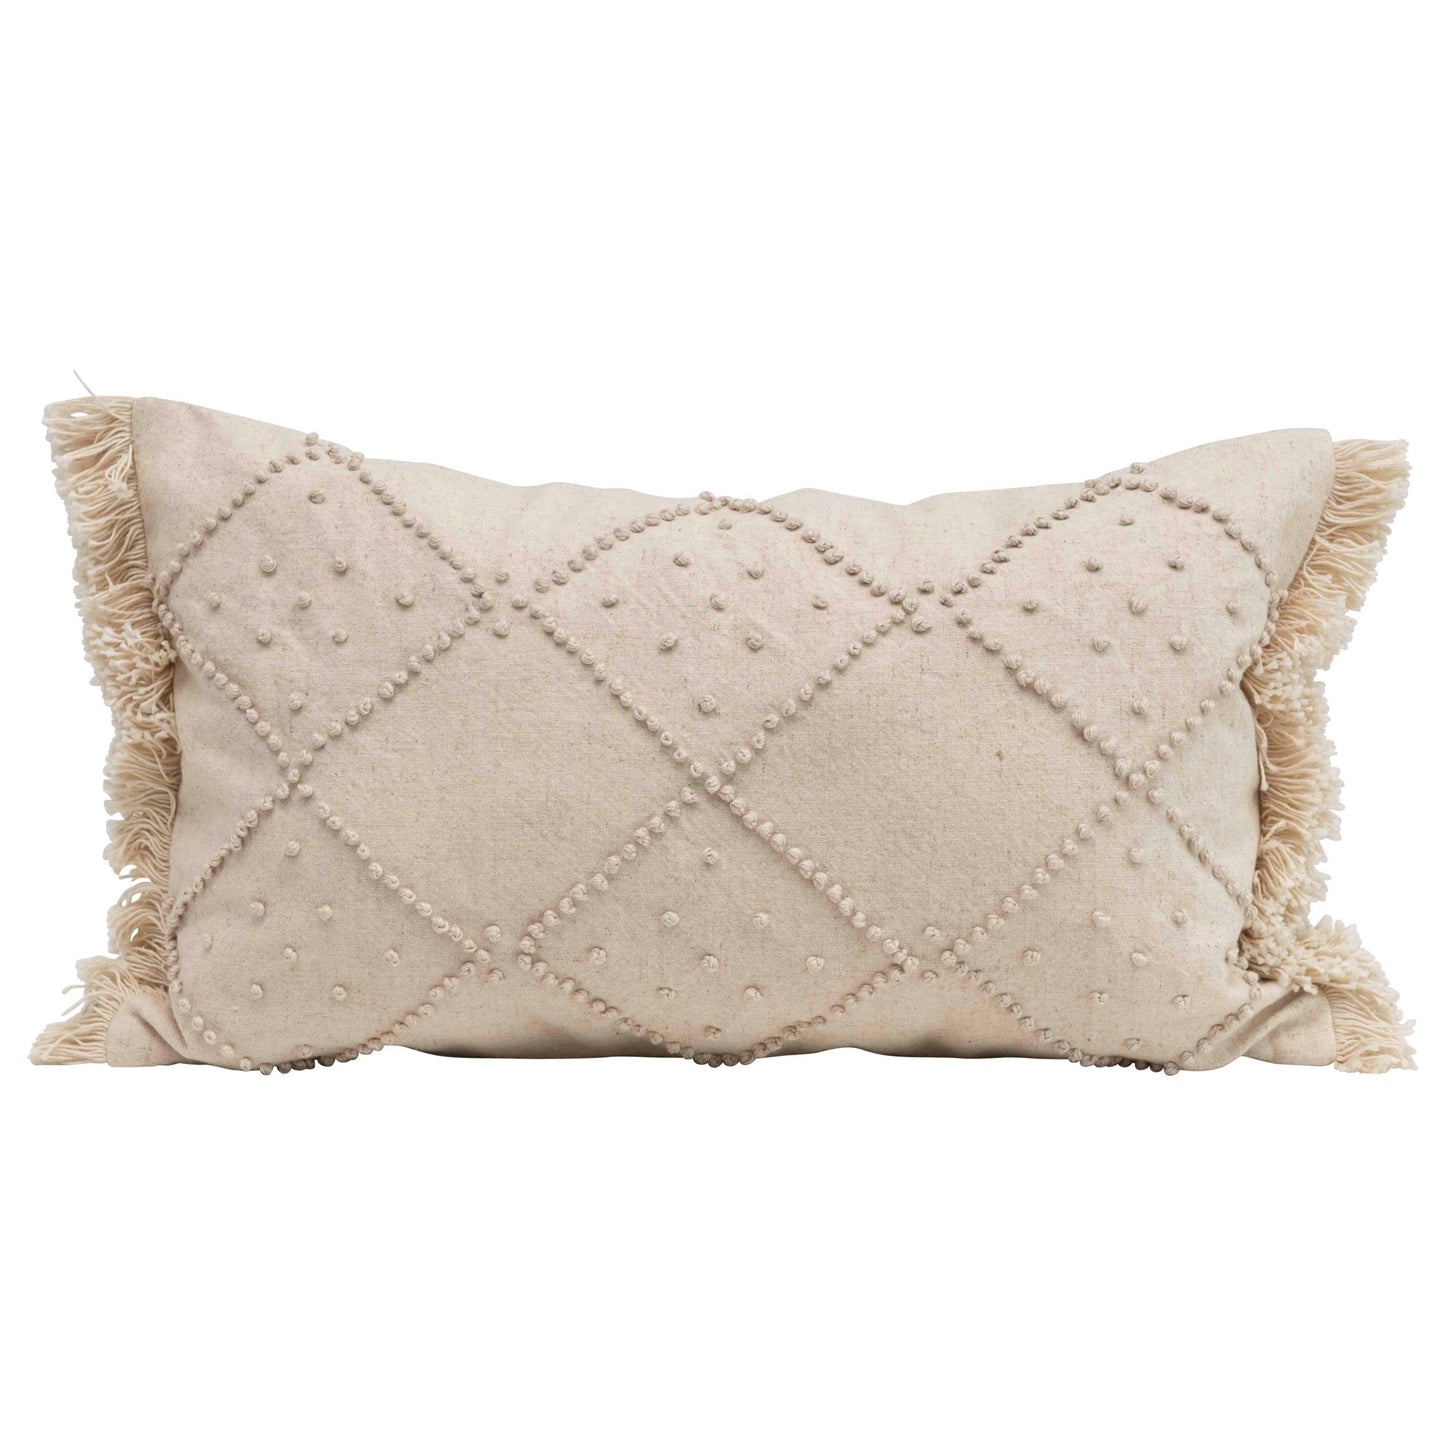 Lumbar Pillow with French Knots and Fringe